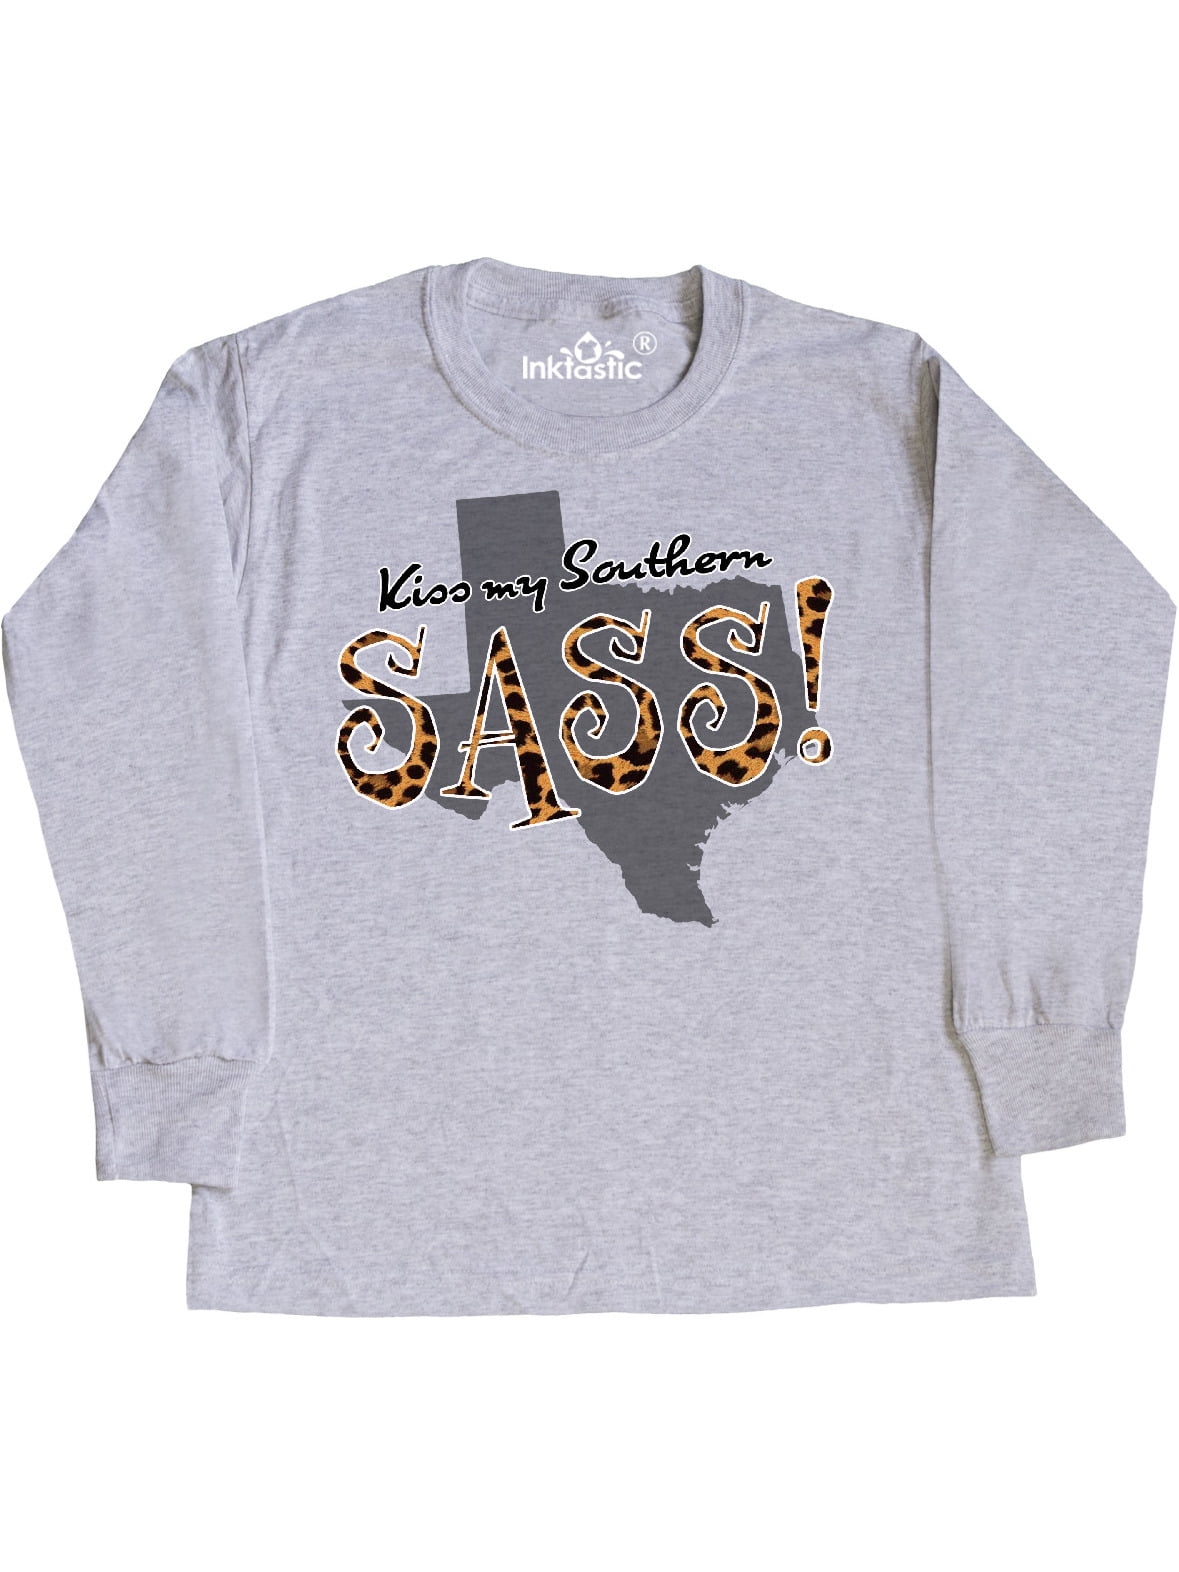 Texas Kiss My Southern Sass In Leopard Print Youth Long Sleeve T Shirt